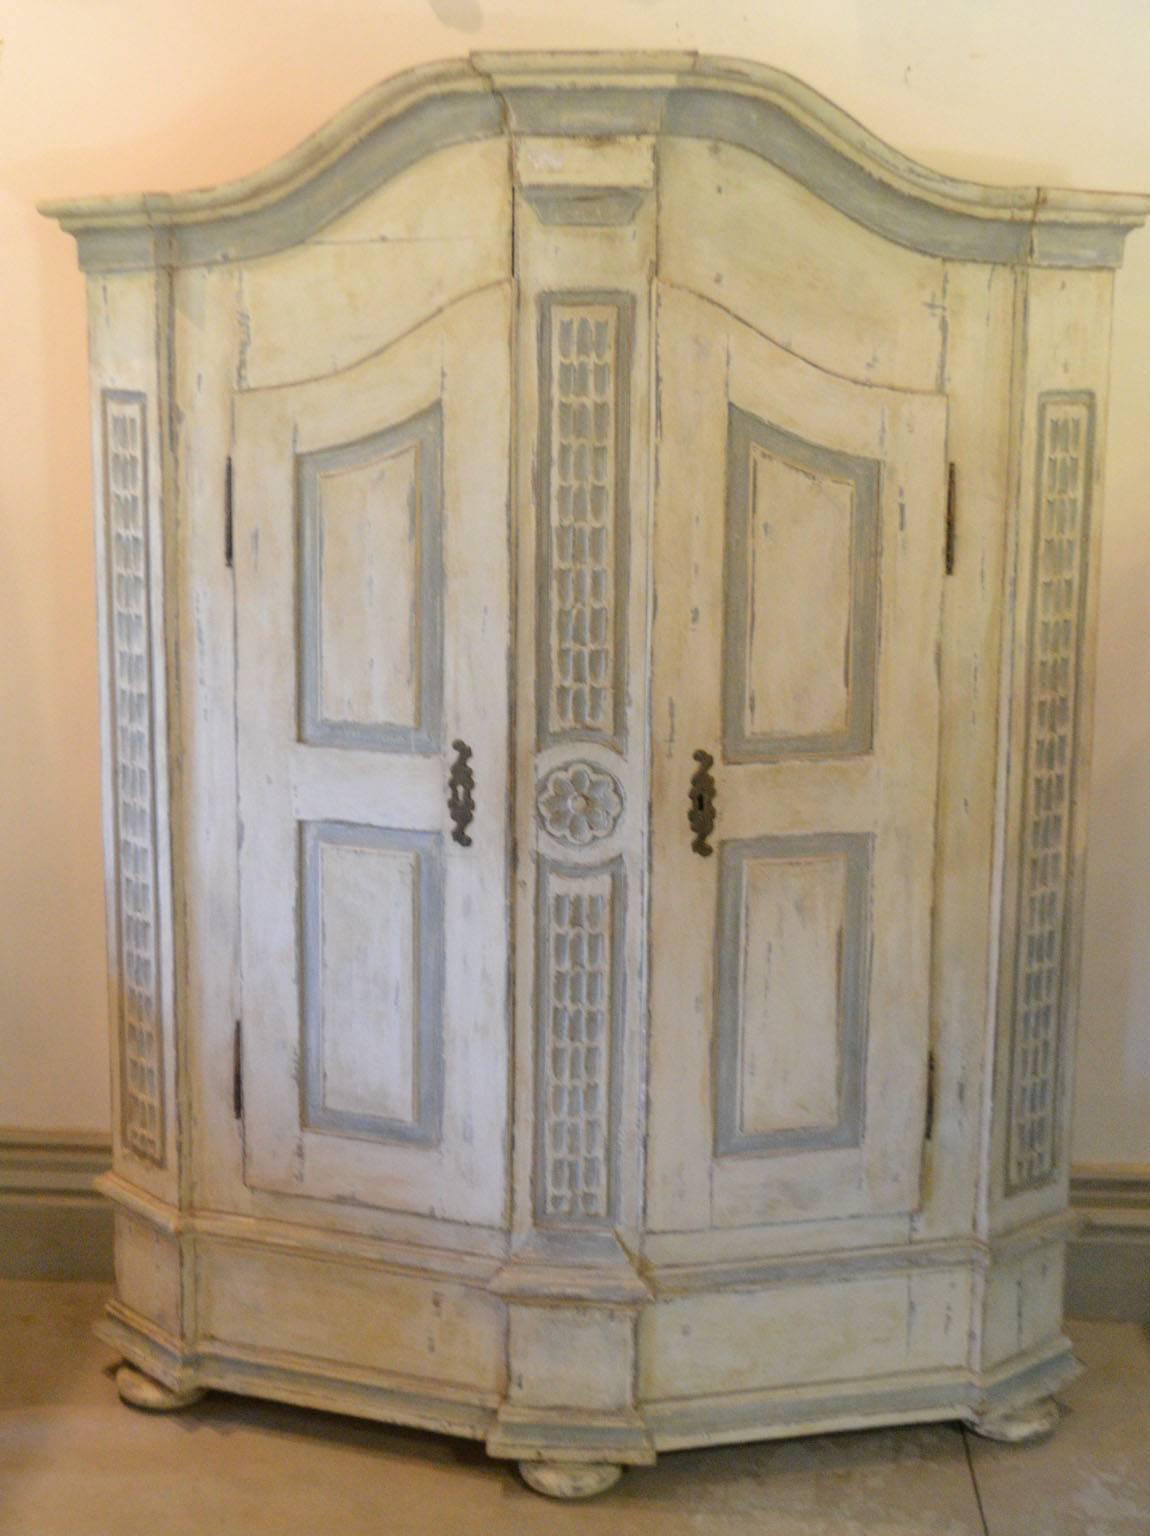 Late 18th century armoire in painted wood. Not all original Paint, circa 1780.